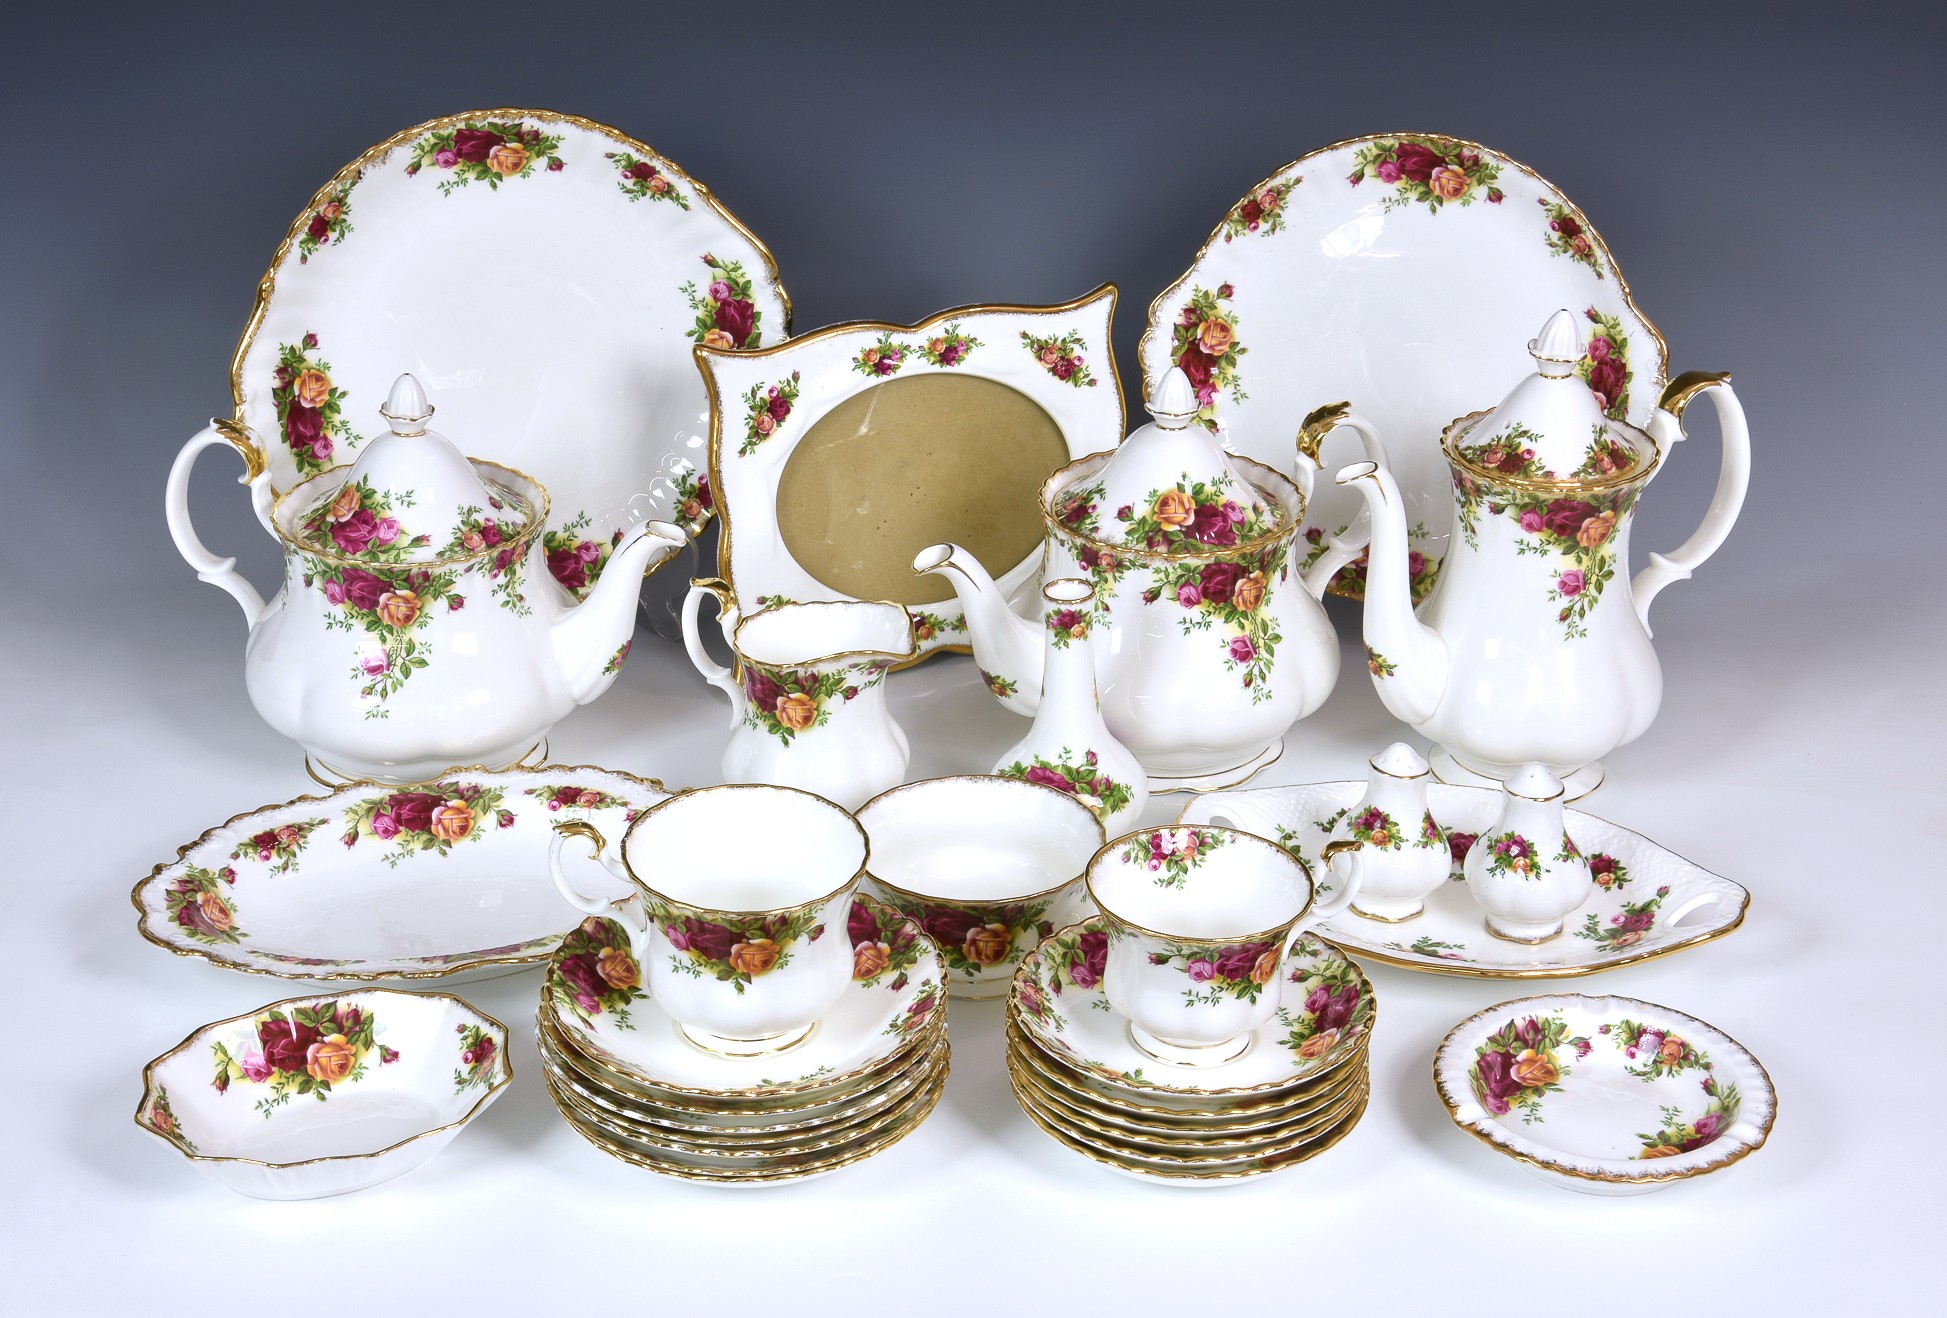 A Royal Albert Old Country Roses tea and coffee servicecomprising two large teapots, a coffee pot, - Image 2 of 2